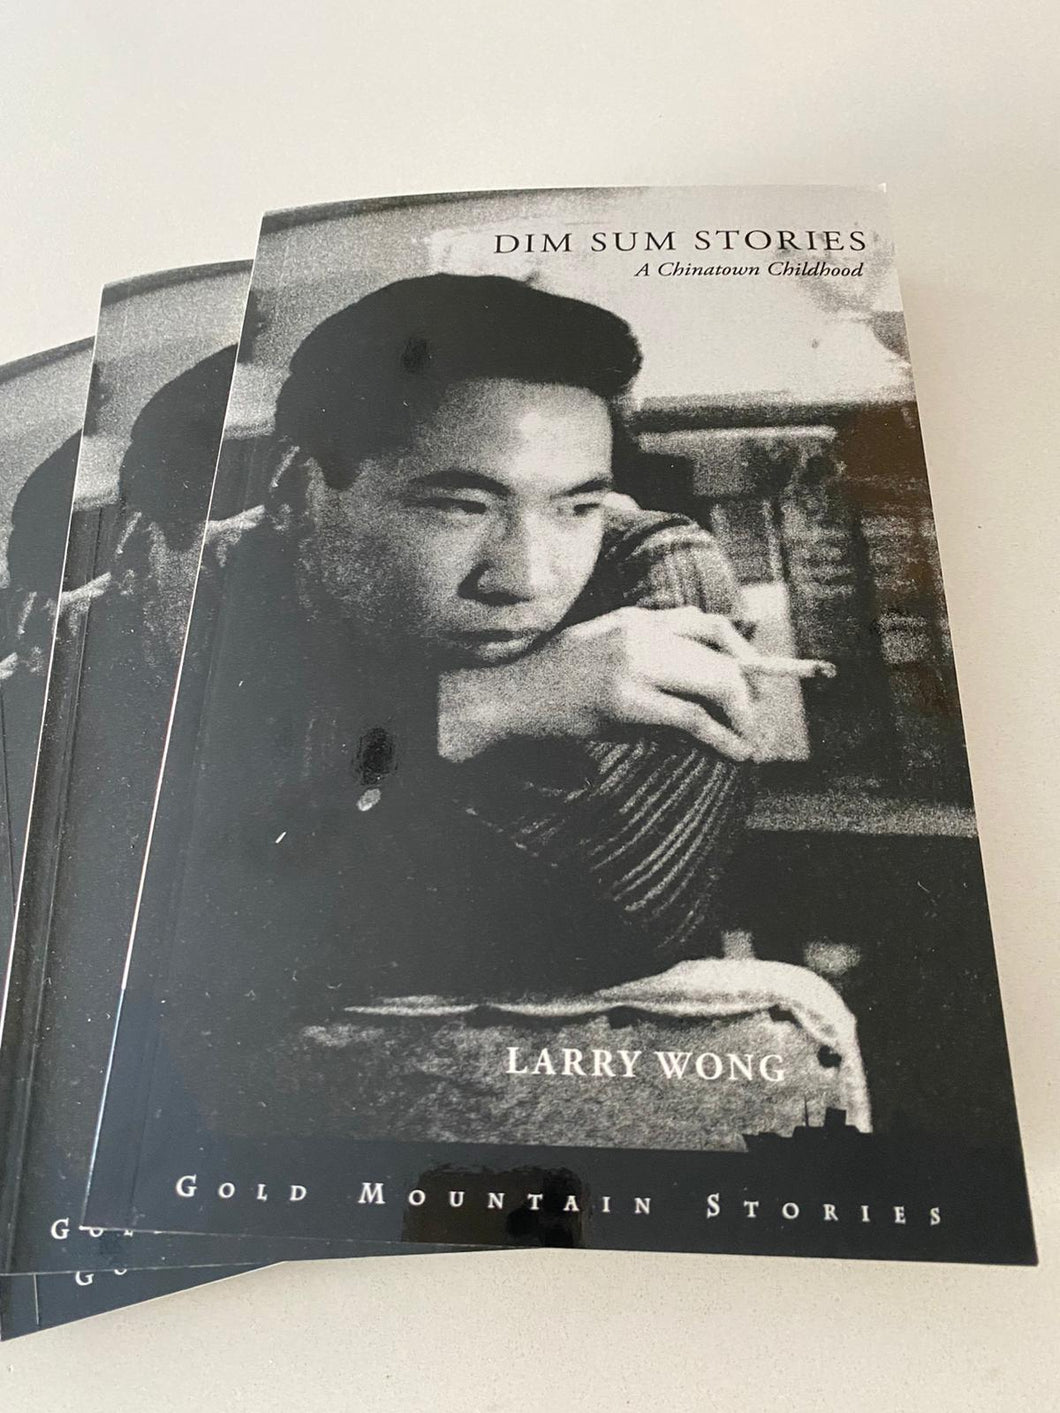 Dim Sum Stories: A Chinatown Childhood, by Larry Wong